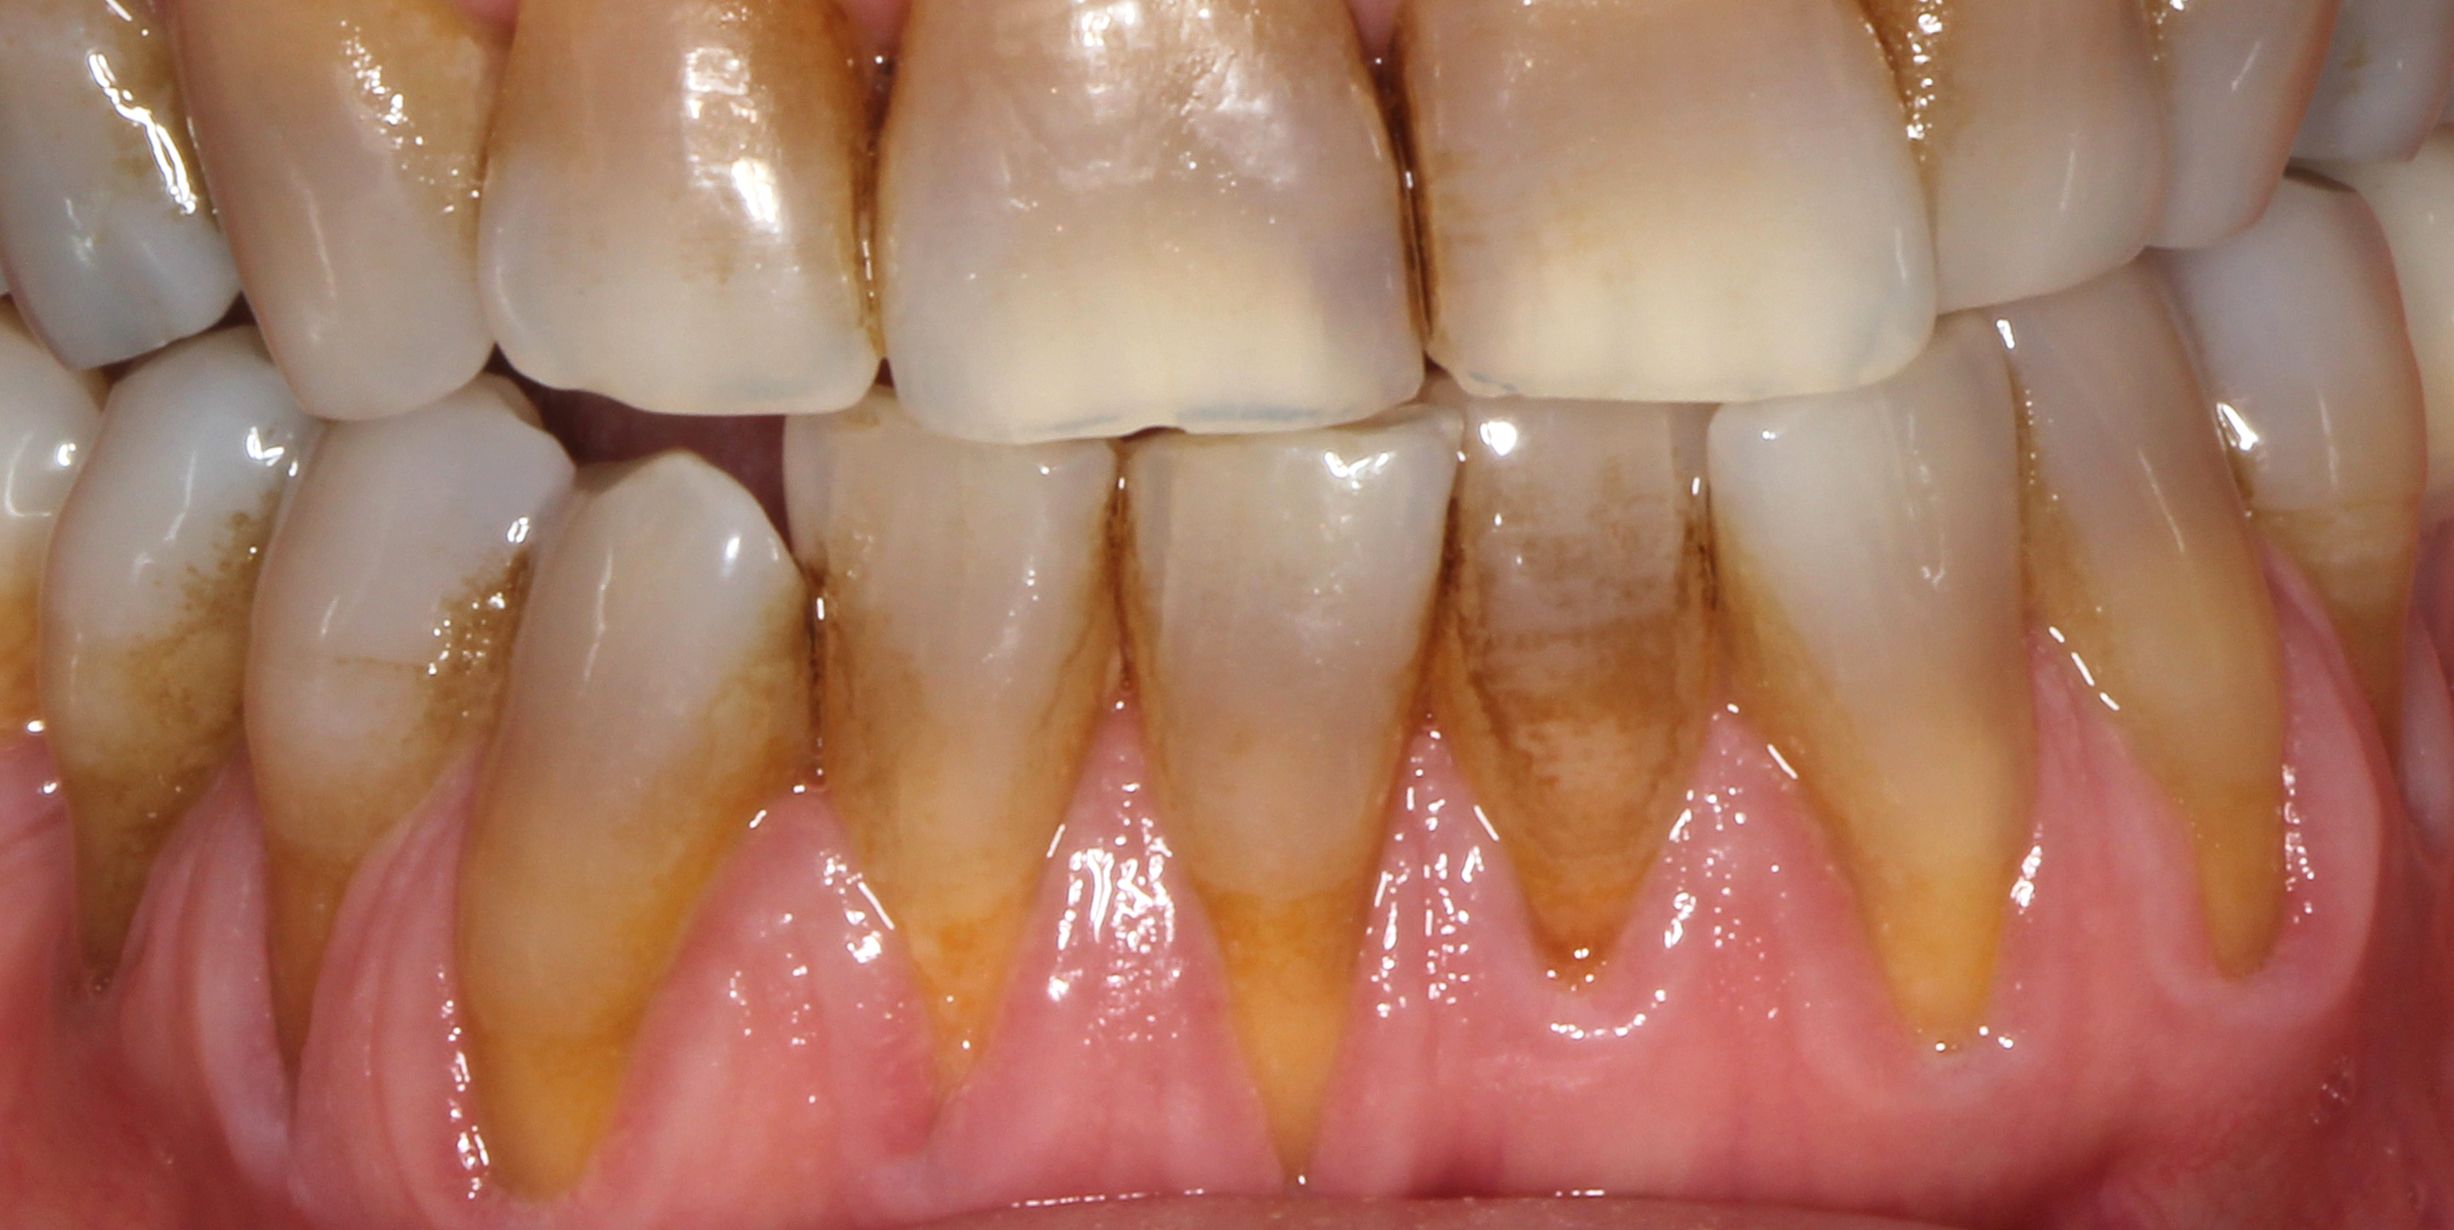 Before treatment of receding gums using the Pinhole technique